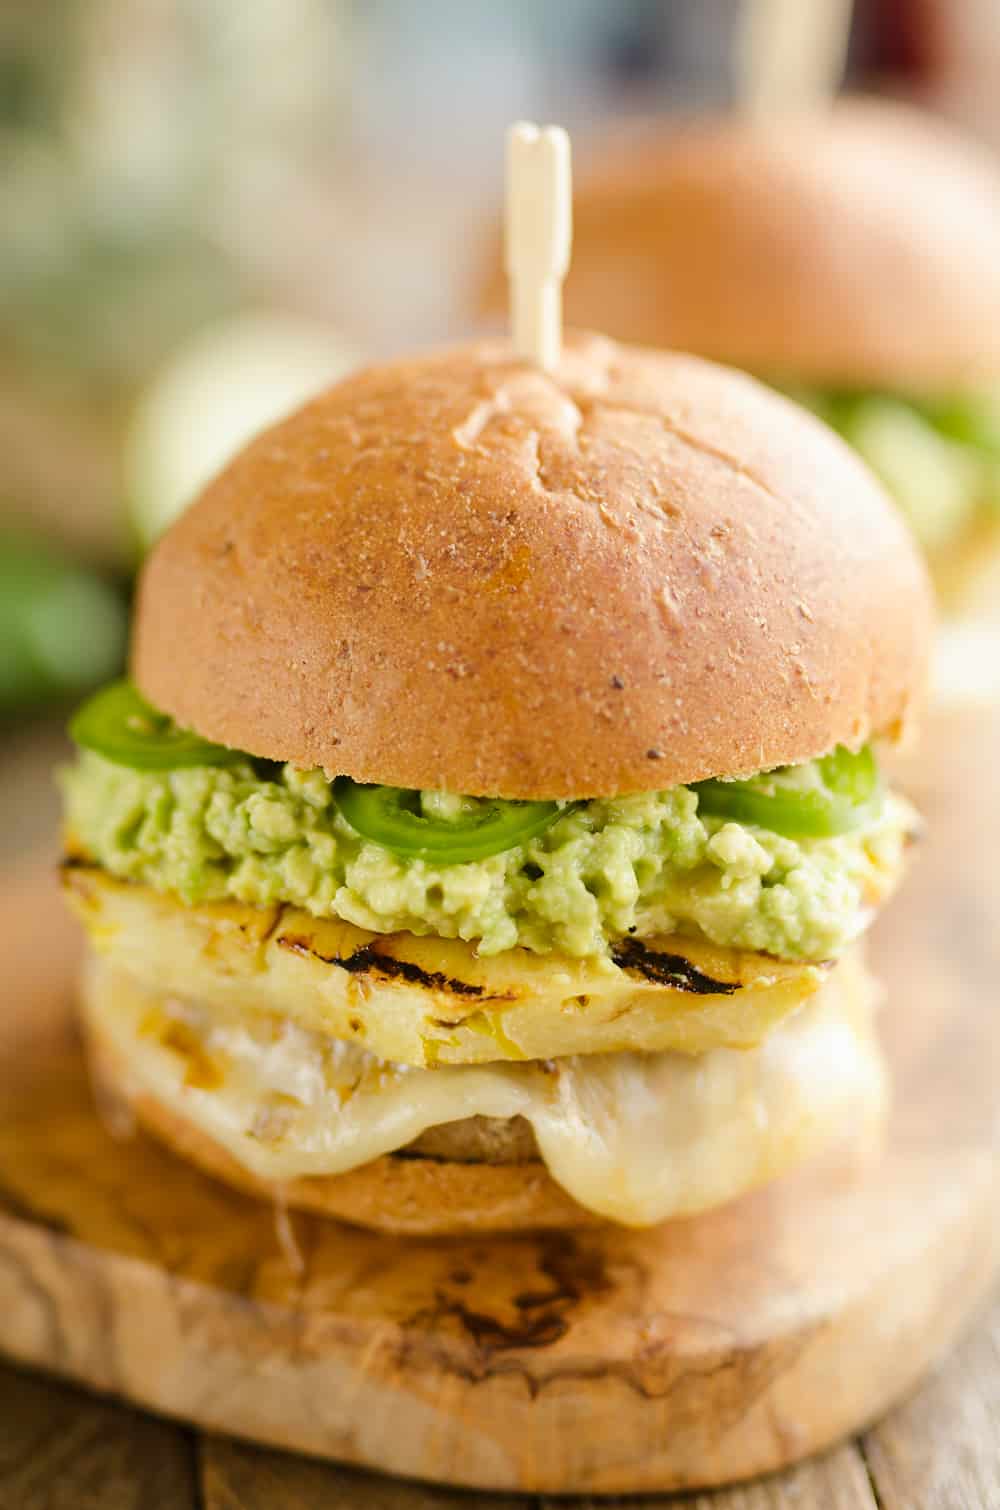 Grilled Pineapple & Guacamole Turkey Burger is a healthy and easy recipe made on the grill! Juicy Jennie-O Turkey Burgers are topped with pepperjack cheese, sweet grilled pineapple, guacamole and fresh jalapeños for a zesty burger perfect for any grill out. 